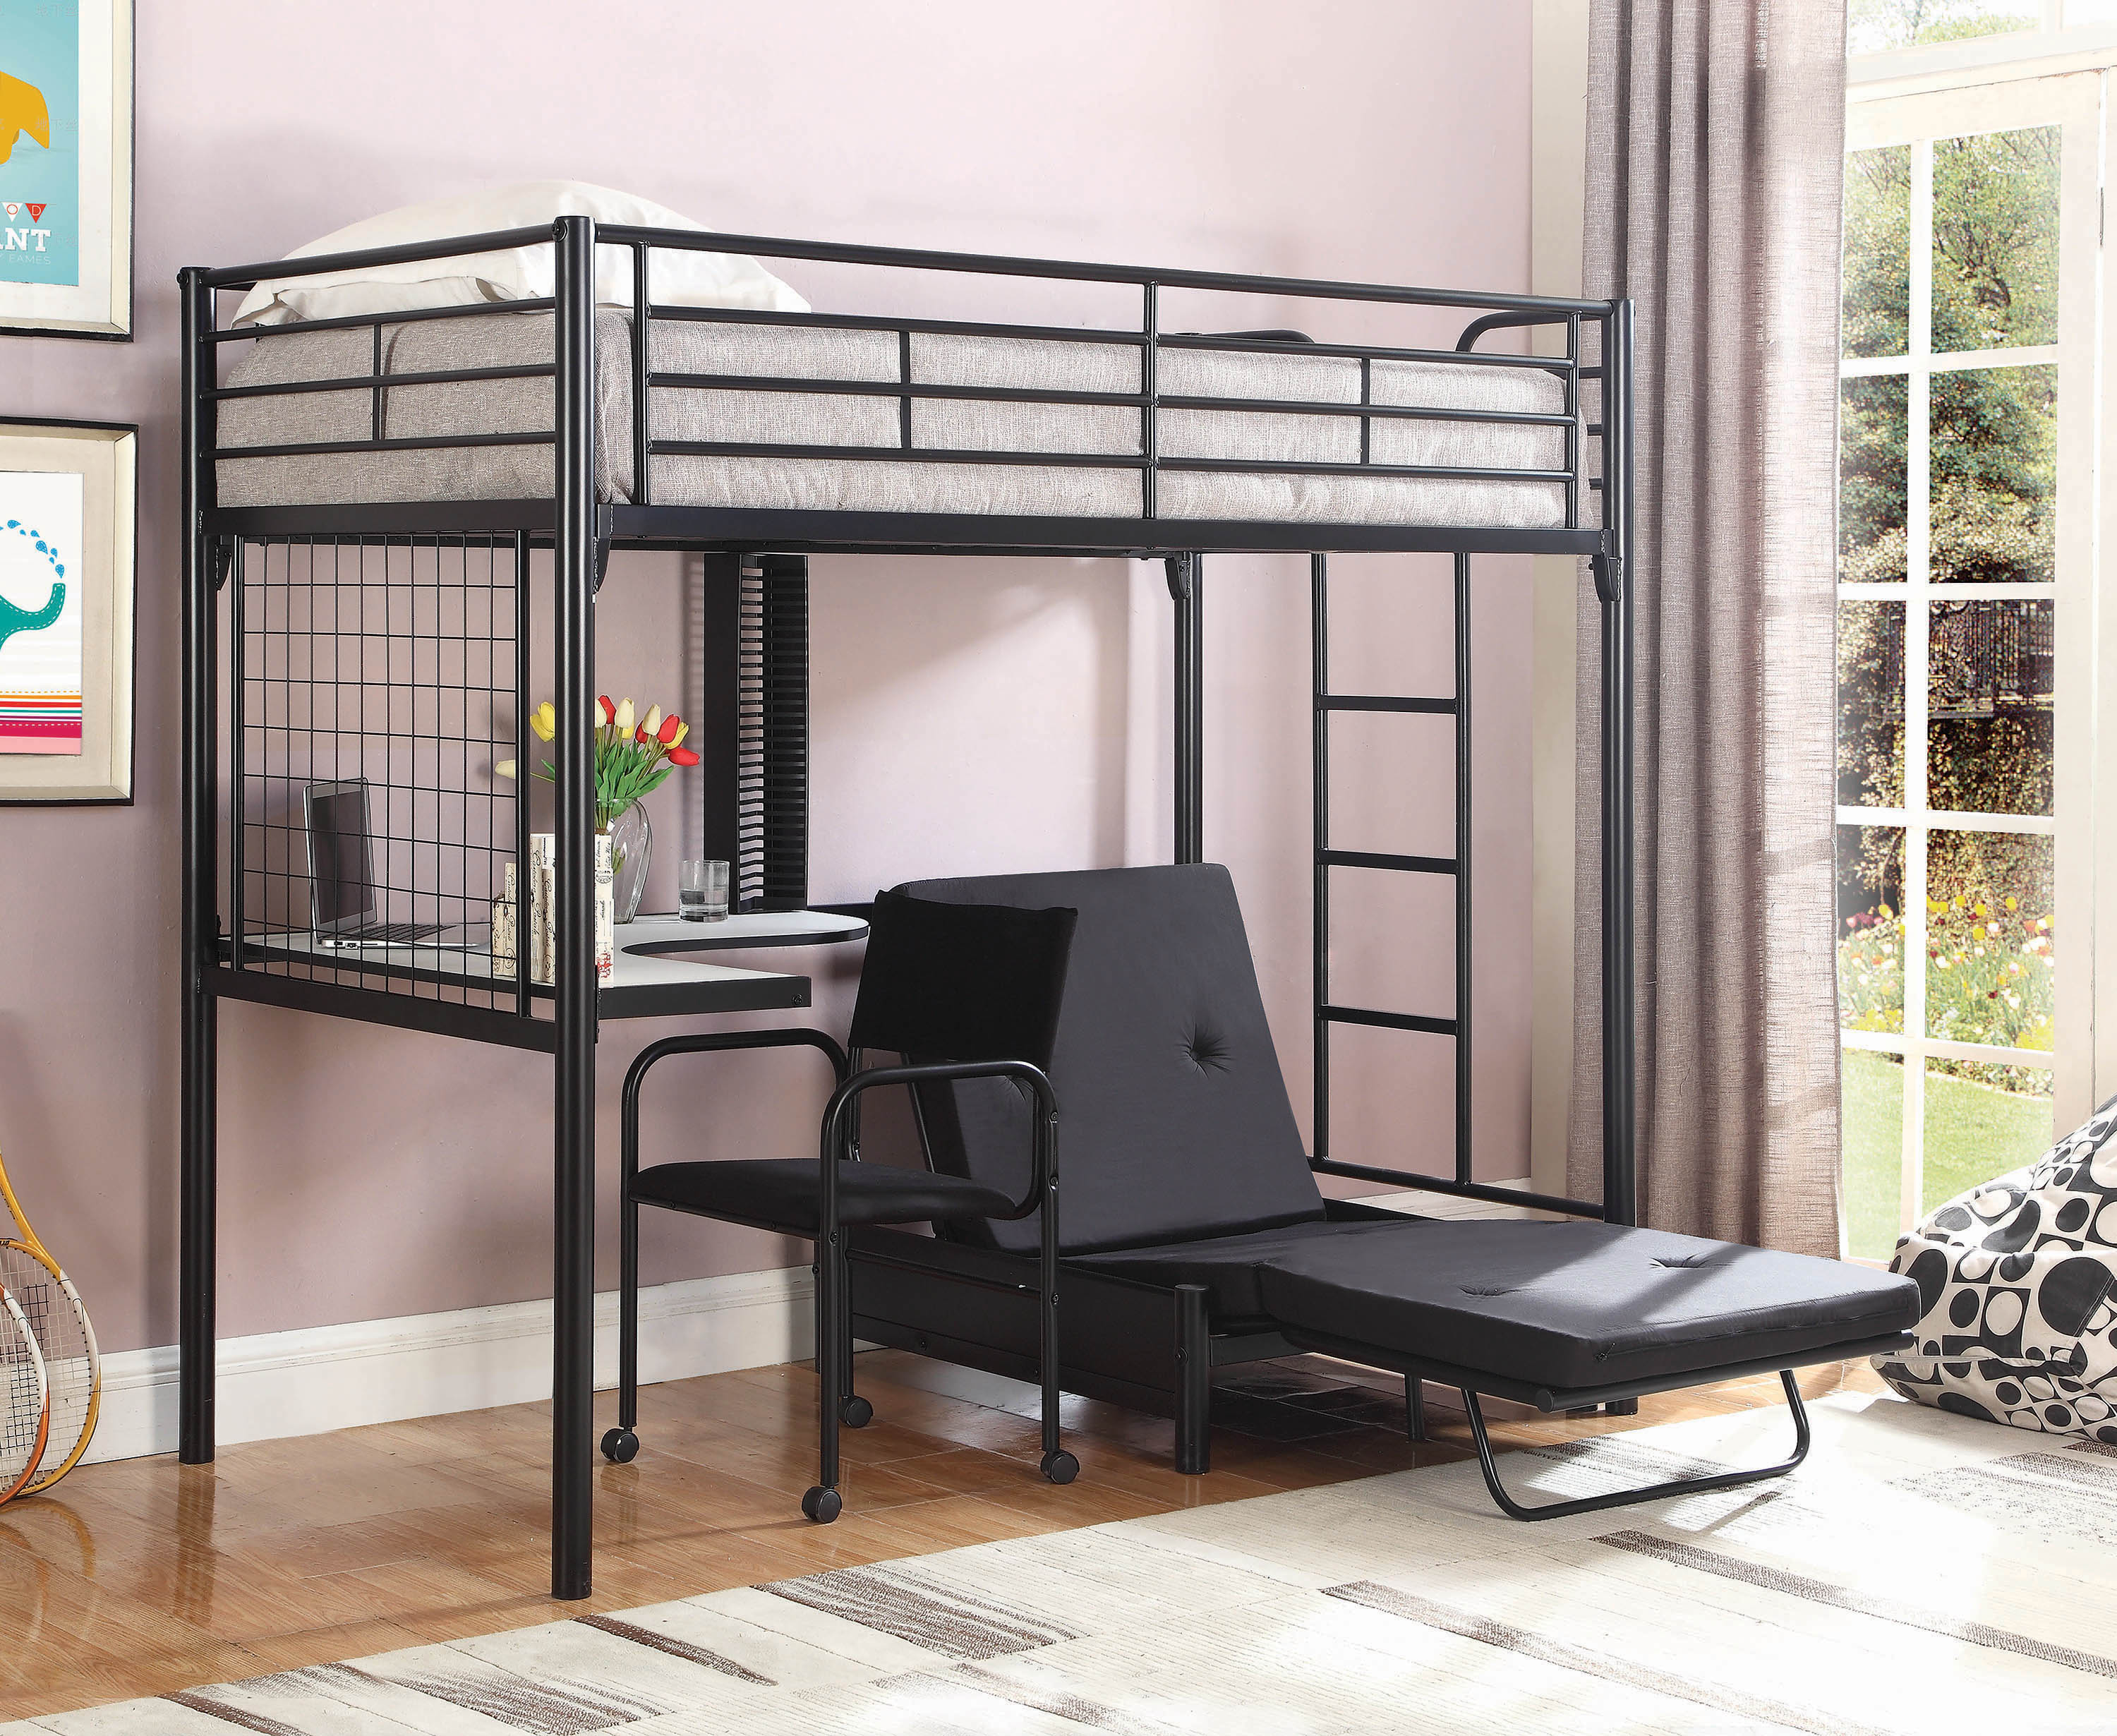 loft bed with futon and desk